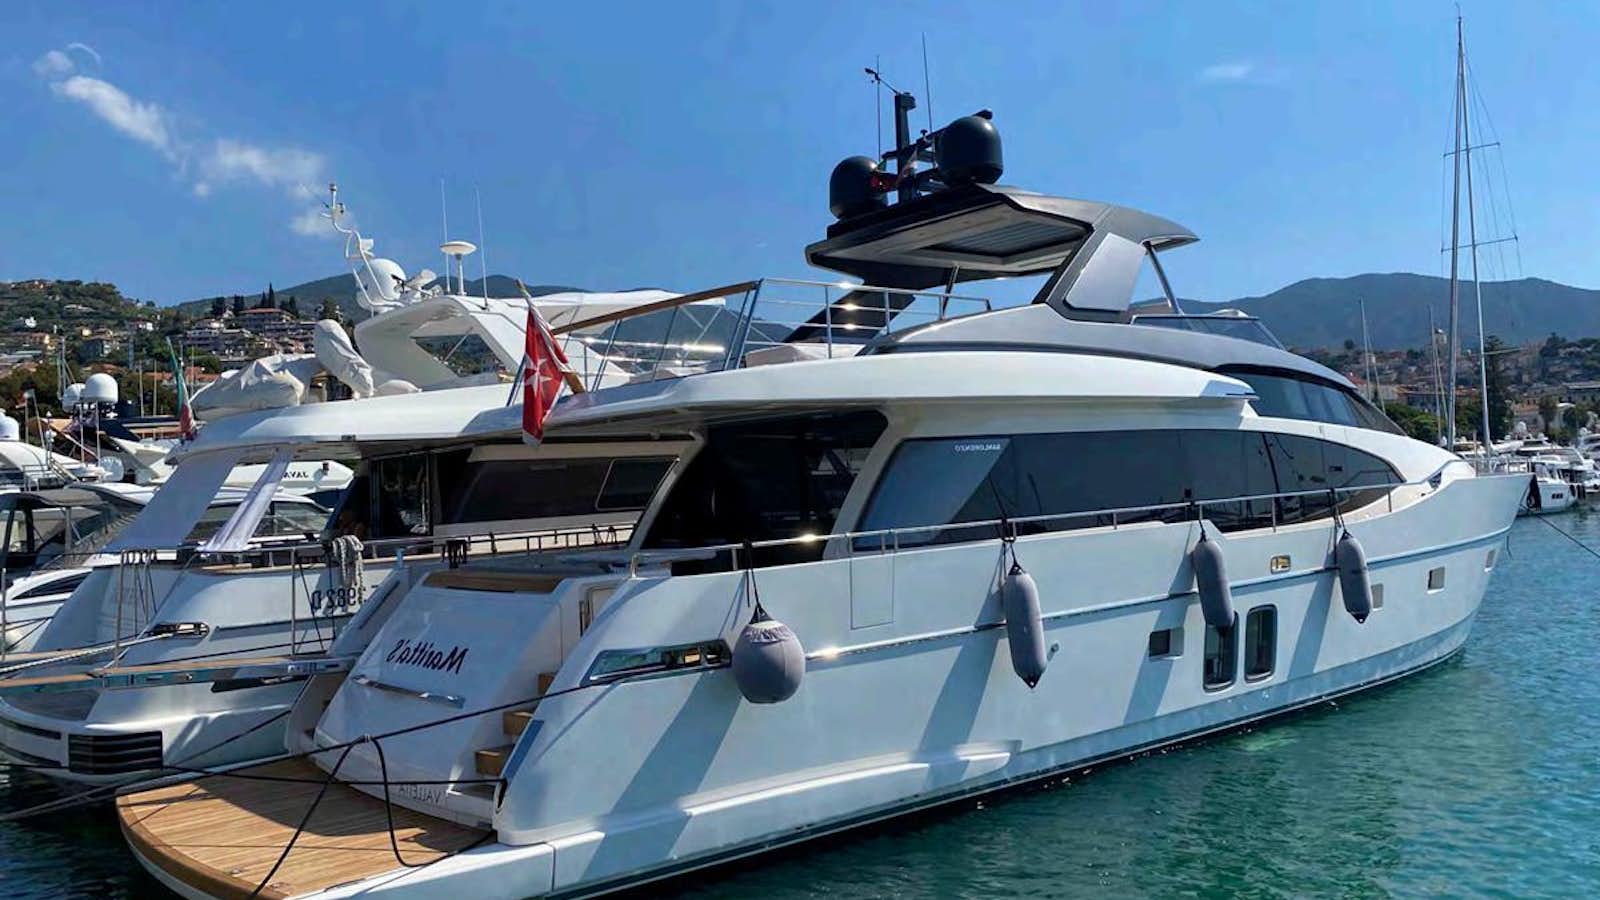 a couple of boats are parked in the water aboard MARITTA’S Yacht for Sale